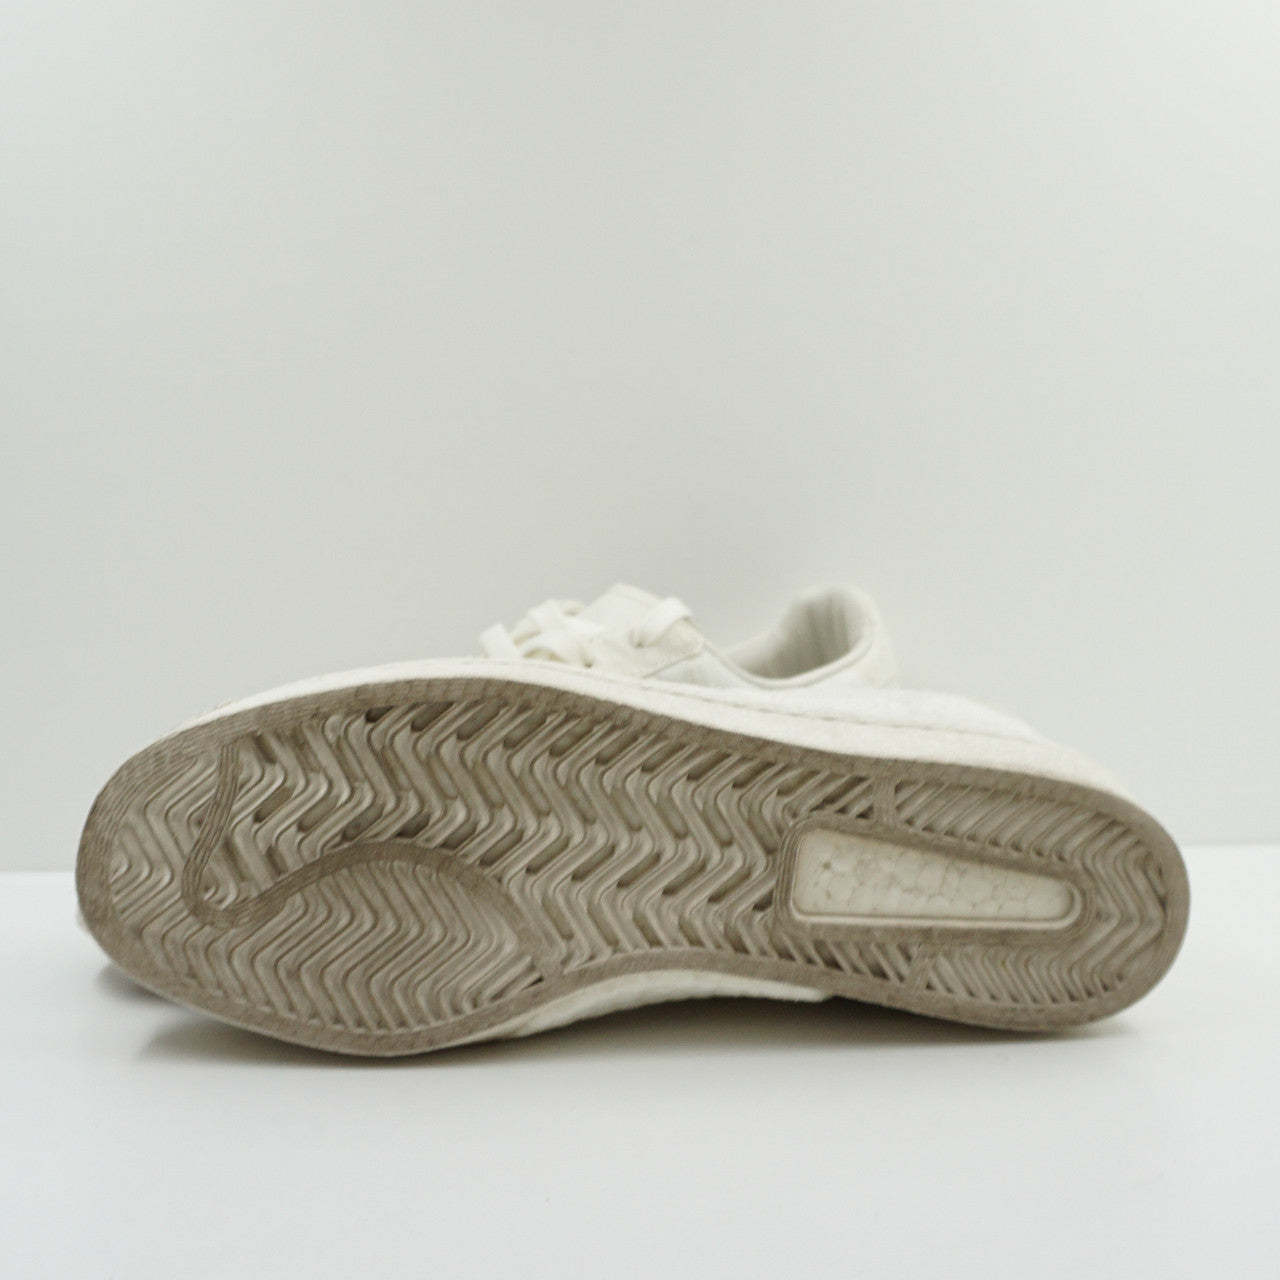 Adidas Superstar Boost SNS Shades of White V2